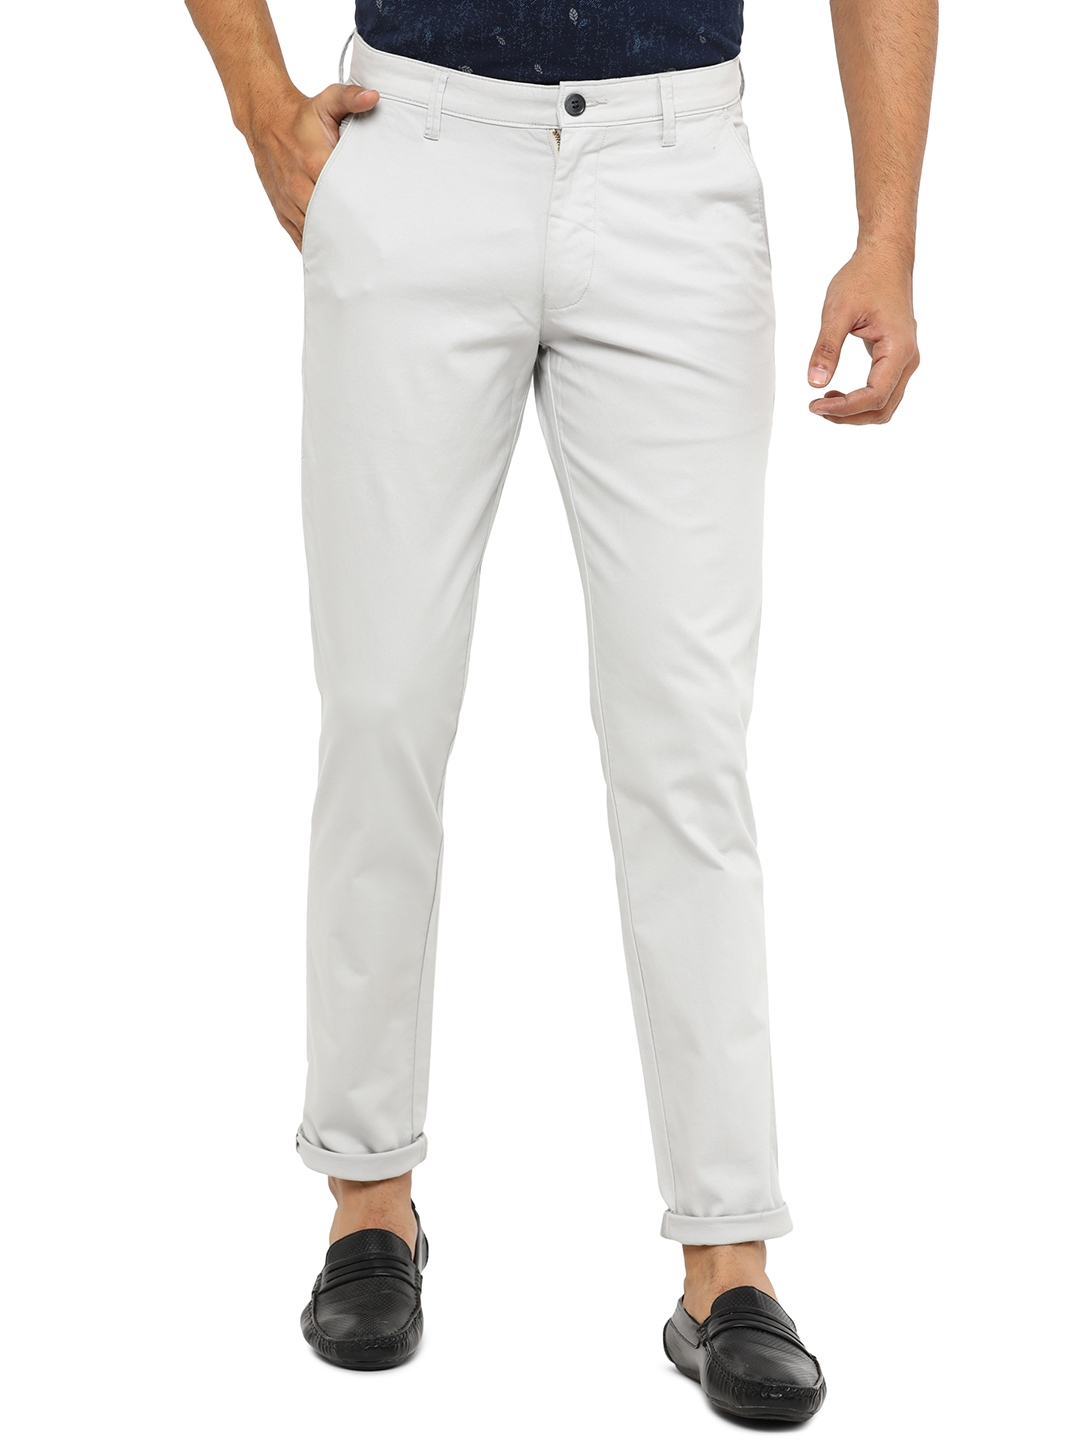 Greenfibre | Light Grey Solid Slim Fit Casual Trouser | Greenfibre 0